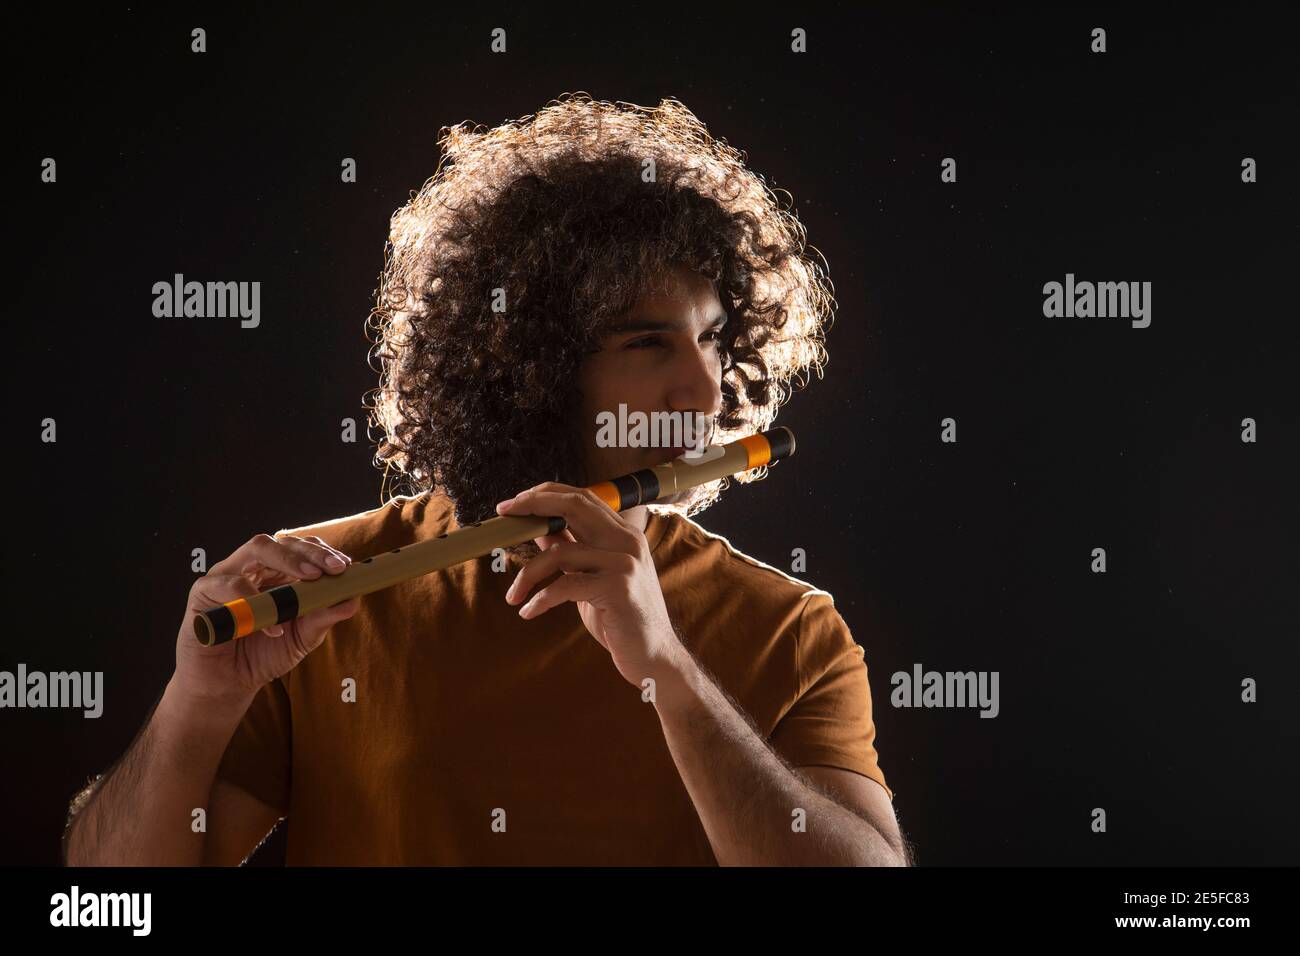 A YOUNG MAN WITH CURLY HAIR STANDING AND PLAYING FLUTE Stock Photo